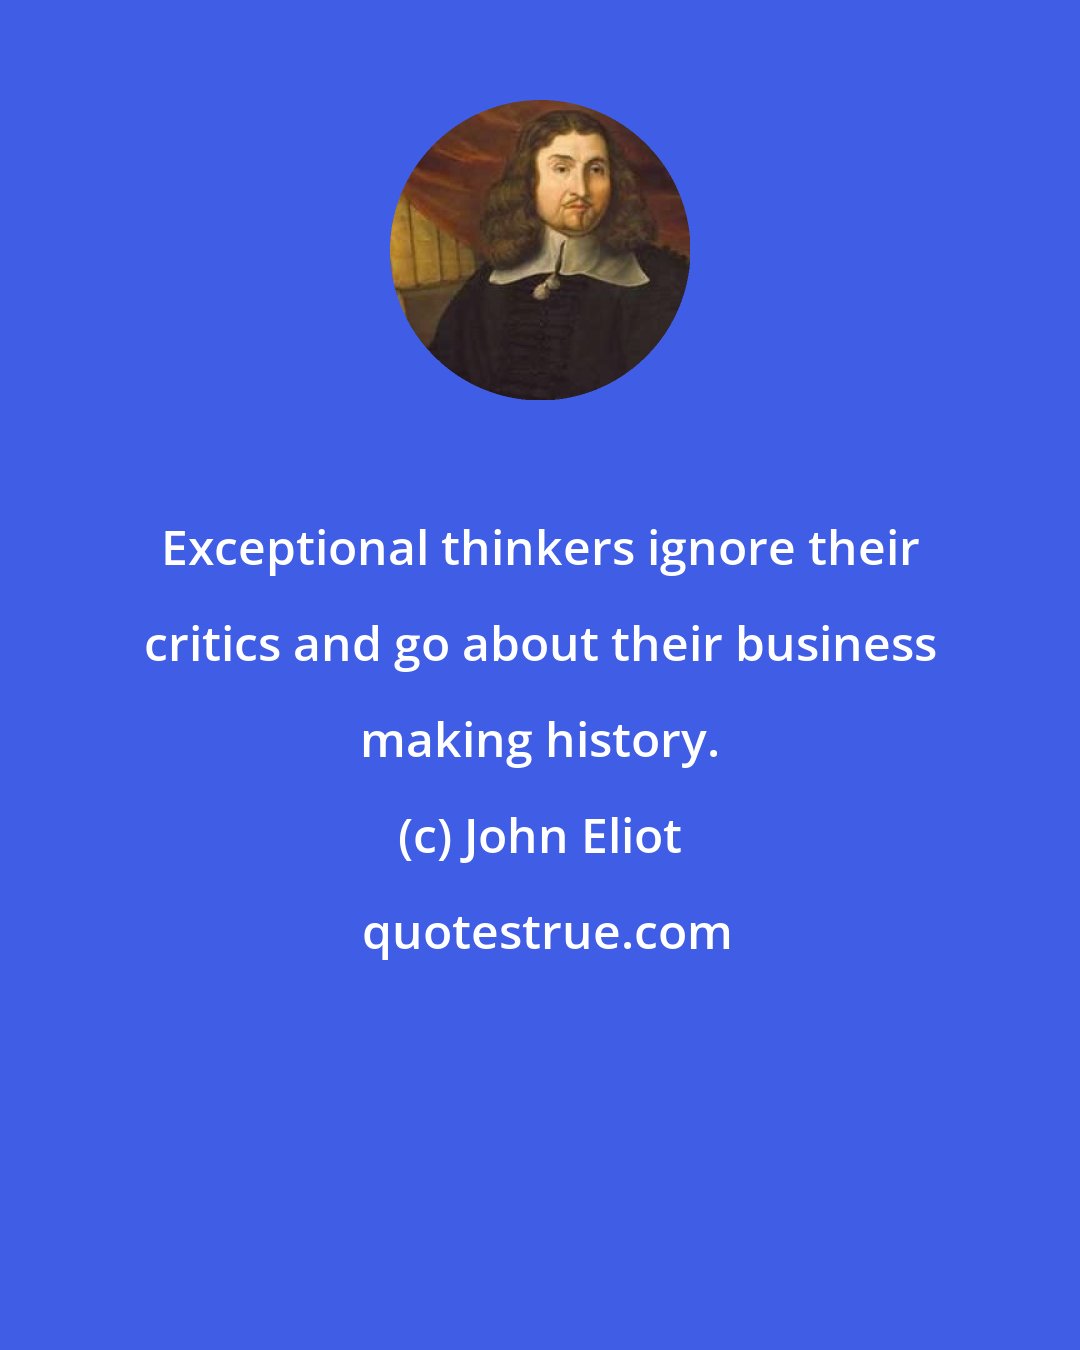 John Eliot: Exceptional thinkers ignore their critics and go about their business making history.